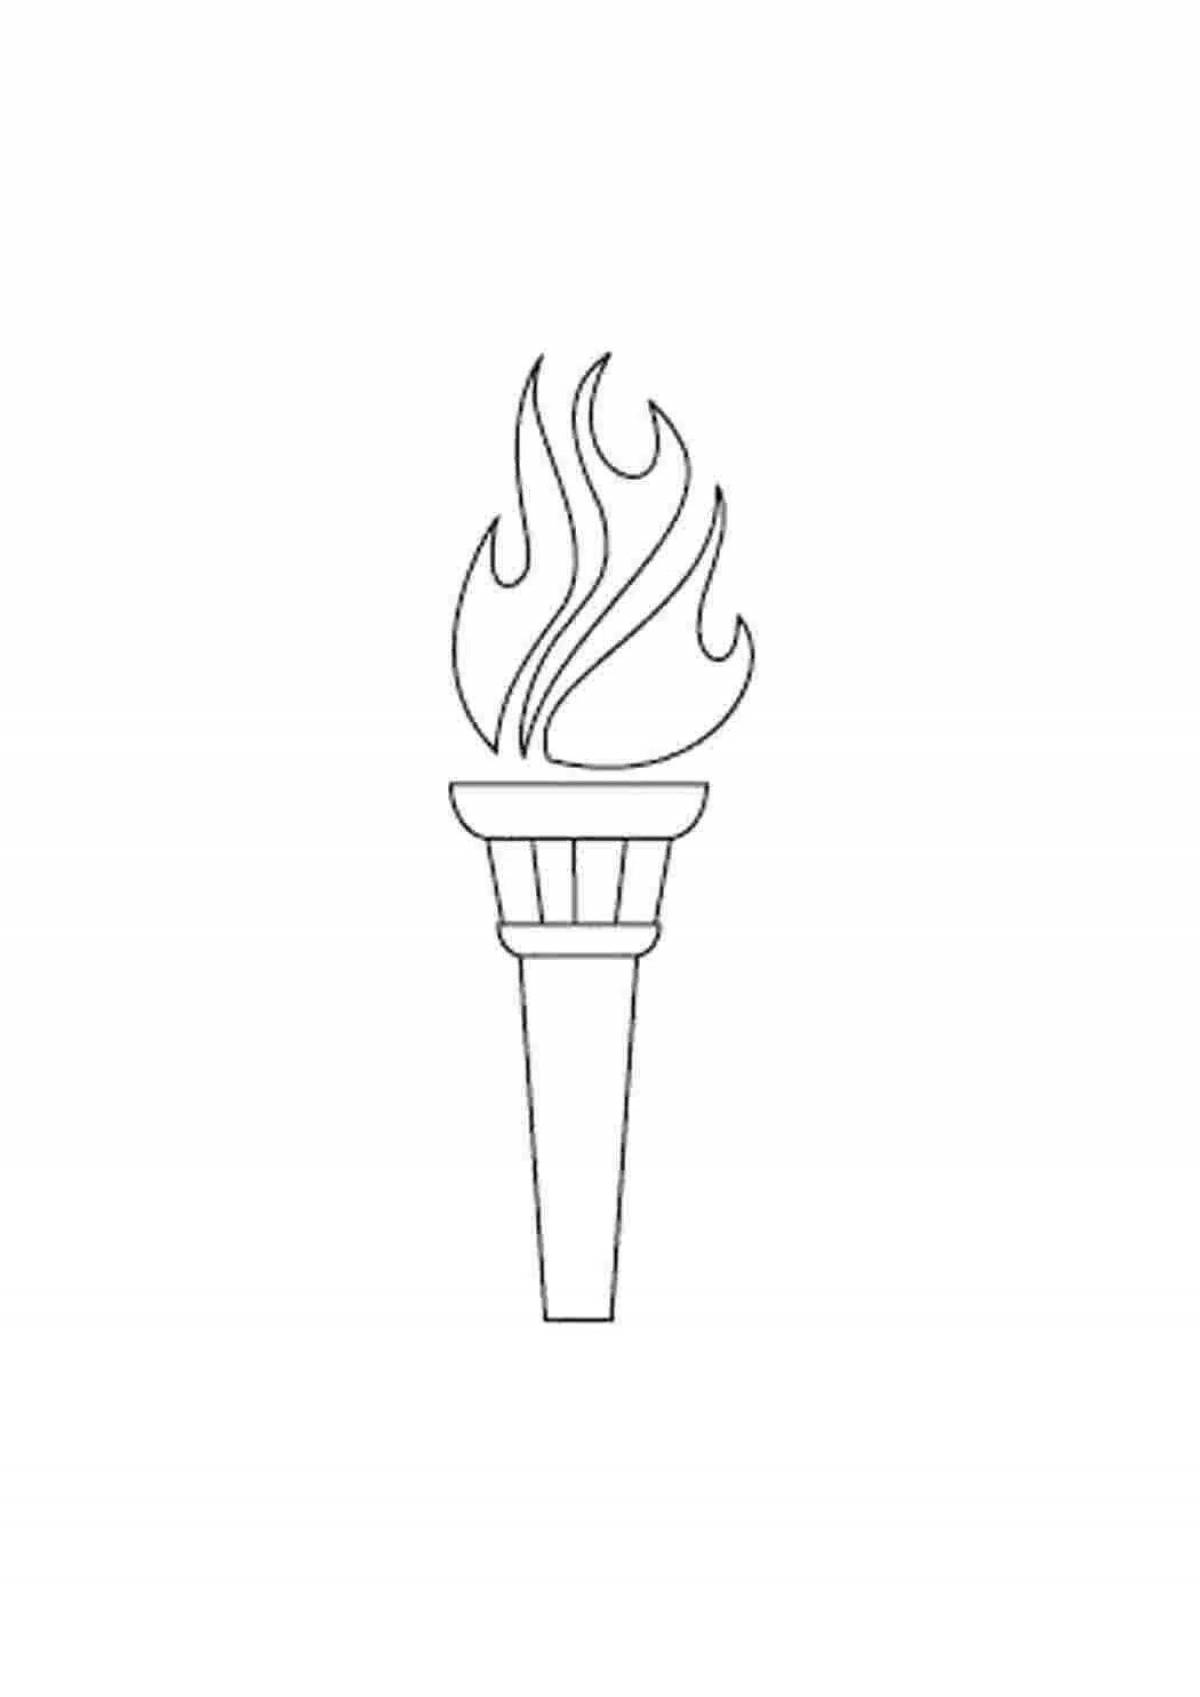 Royal olympic torch coloring page